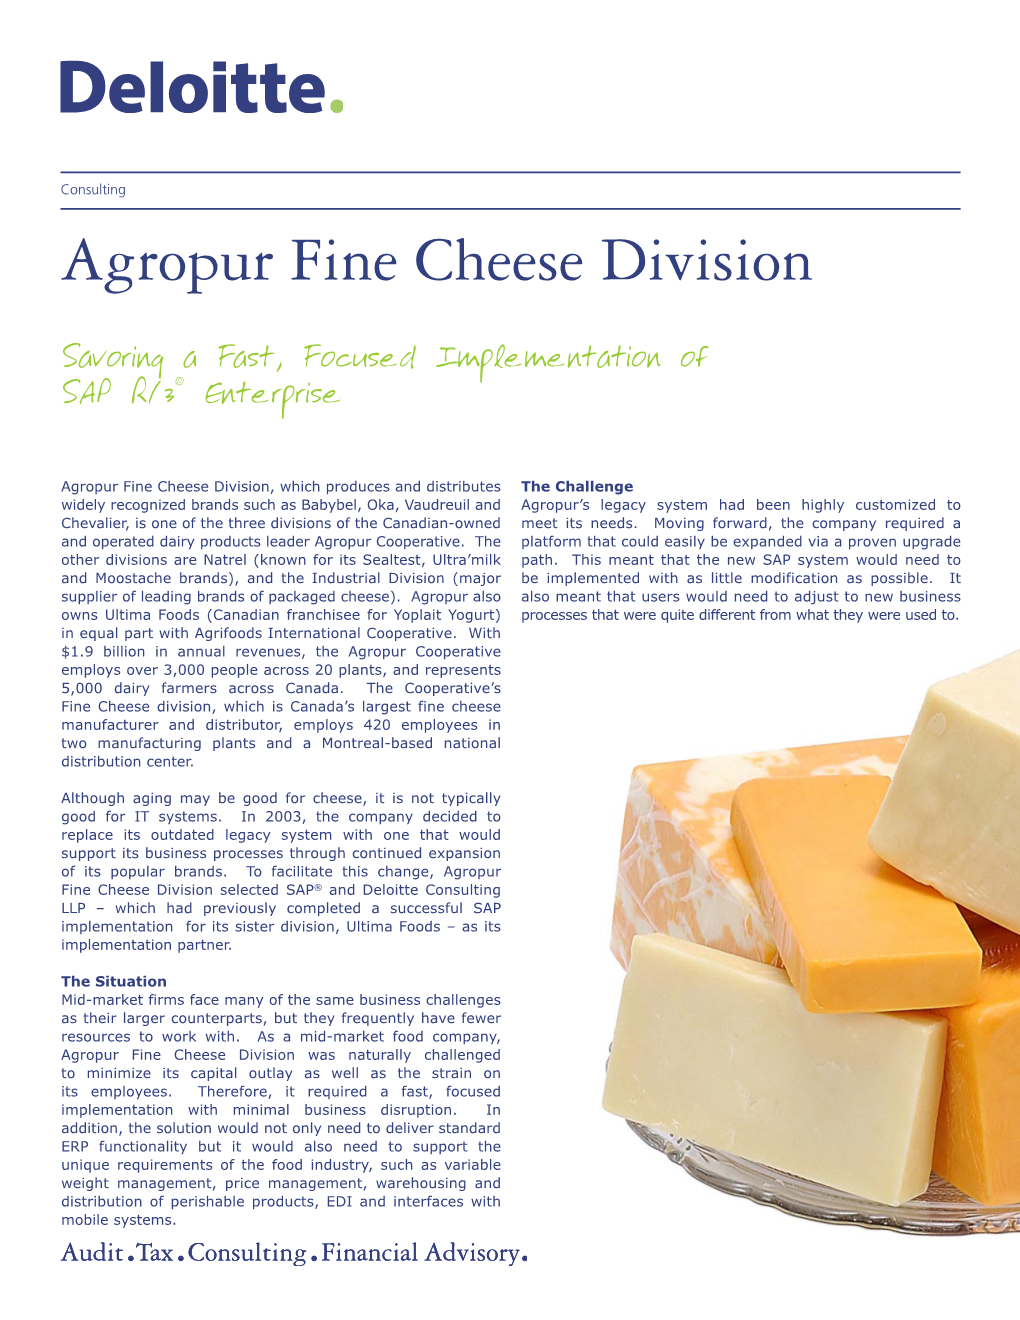 Agropur Fine Cheese Division Download the Case Study